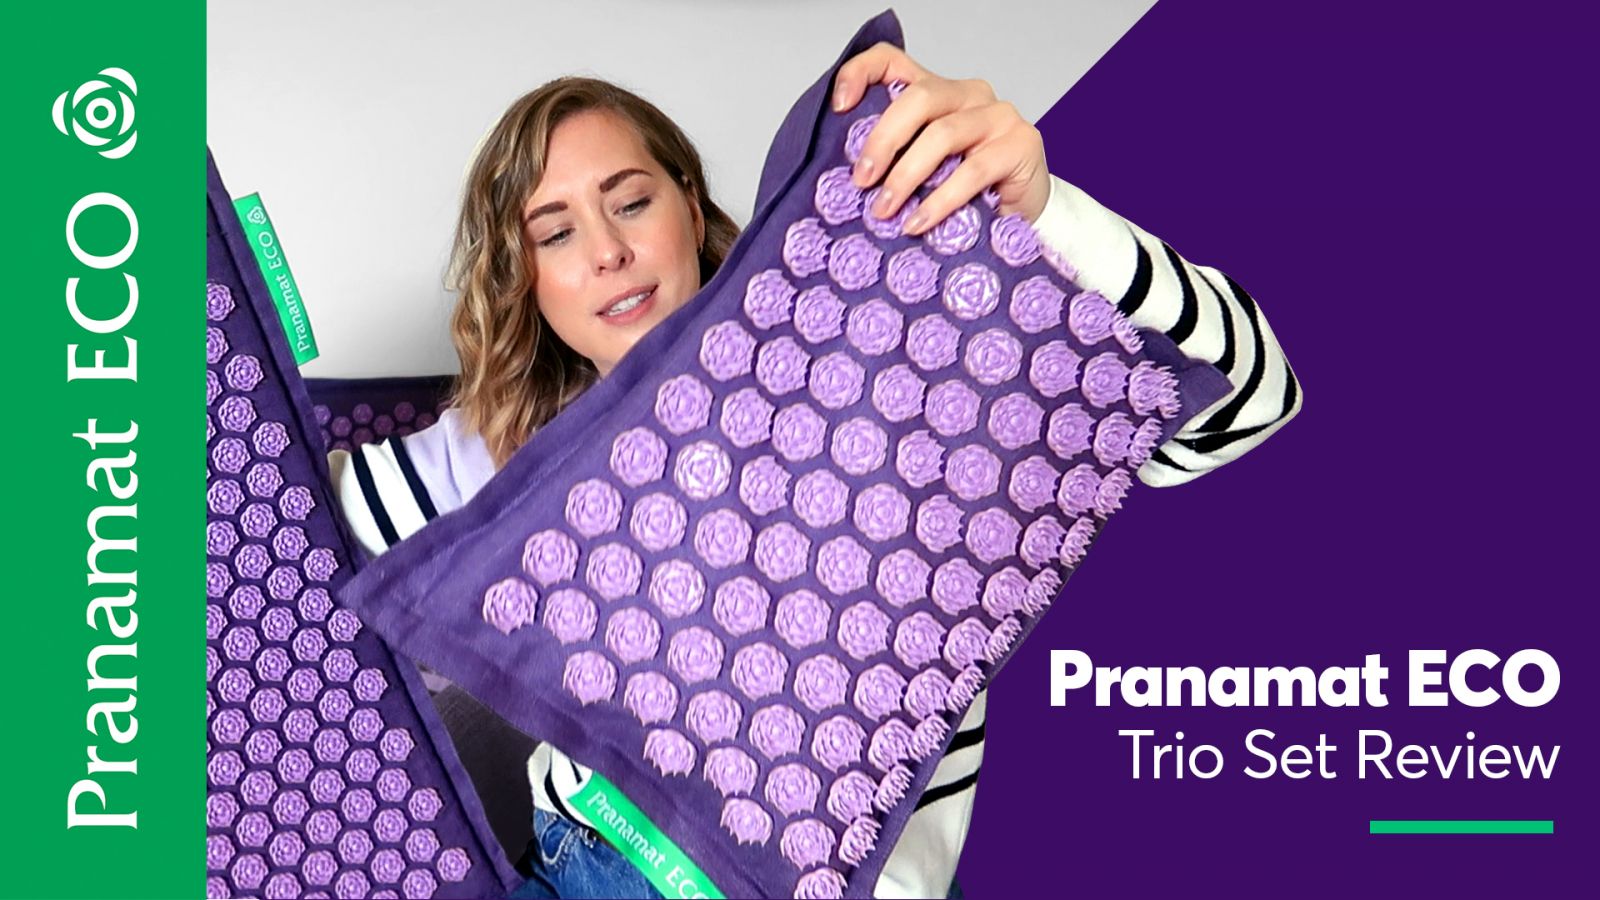 Pranamat ECO - Why is Pranamat ECO such a smart investment? Pranamat ECO  gives you the opportunity to have a massage every day, effectively relieves  back, shoulder and neck pain, helps to